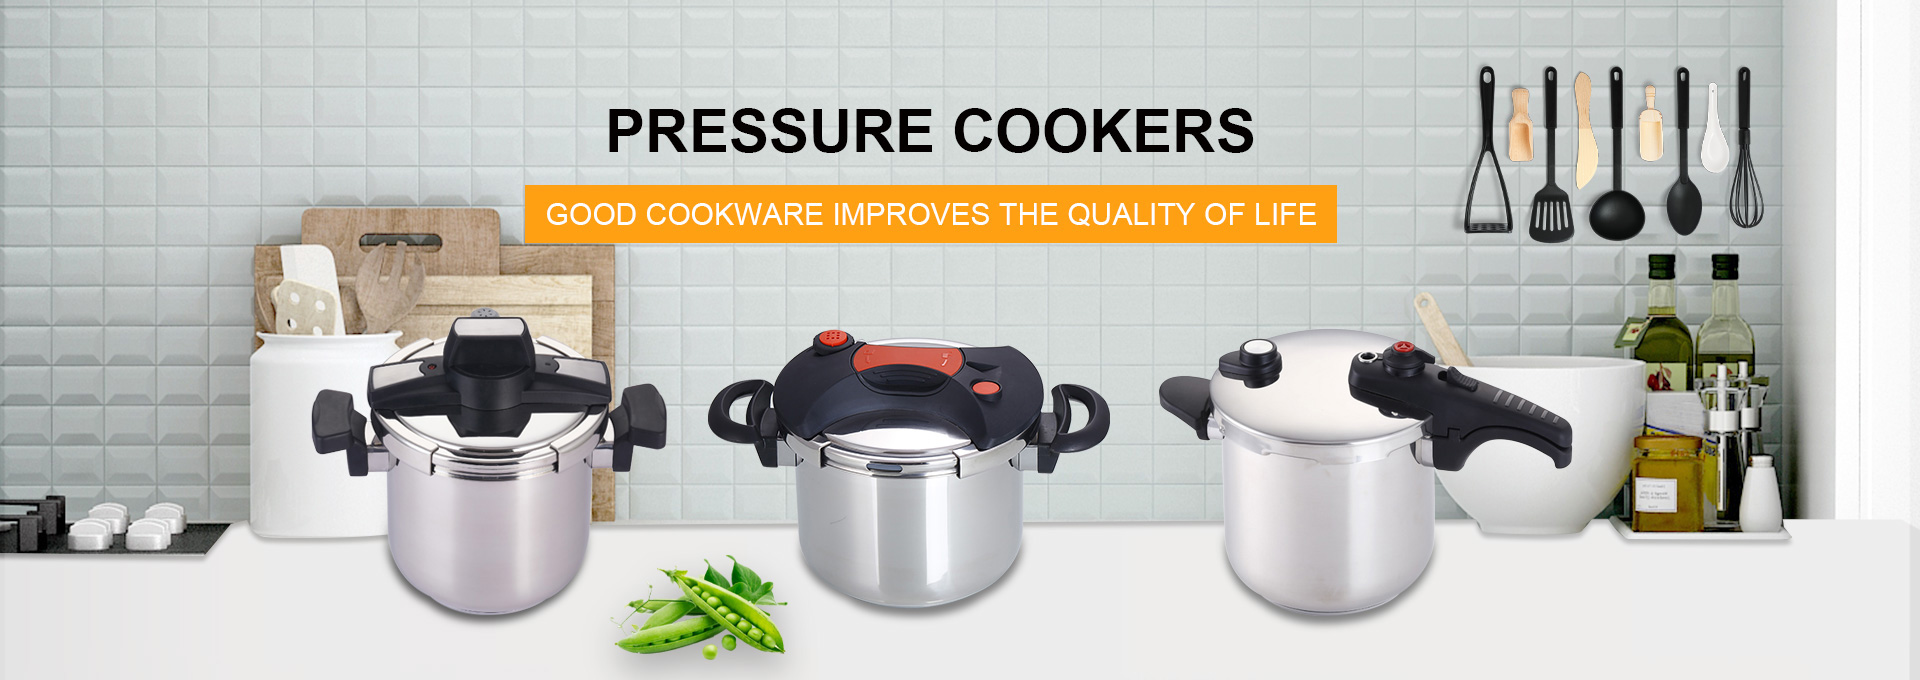 Pressure Cookers စက်ရုံ